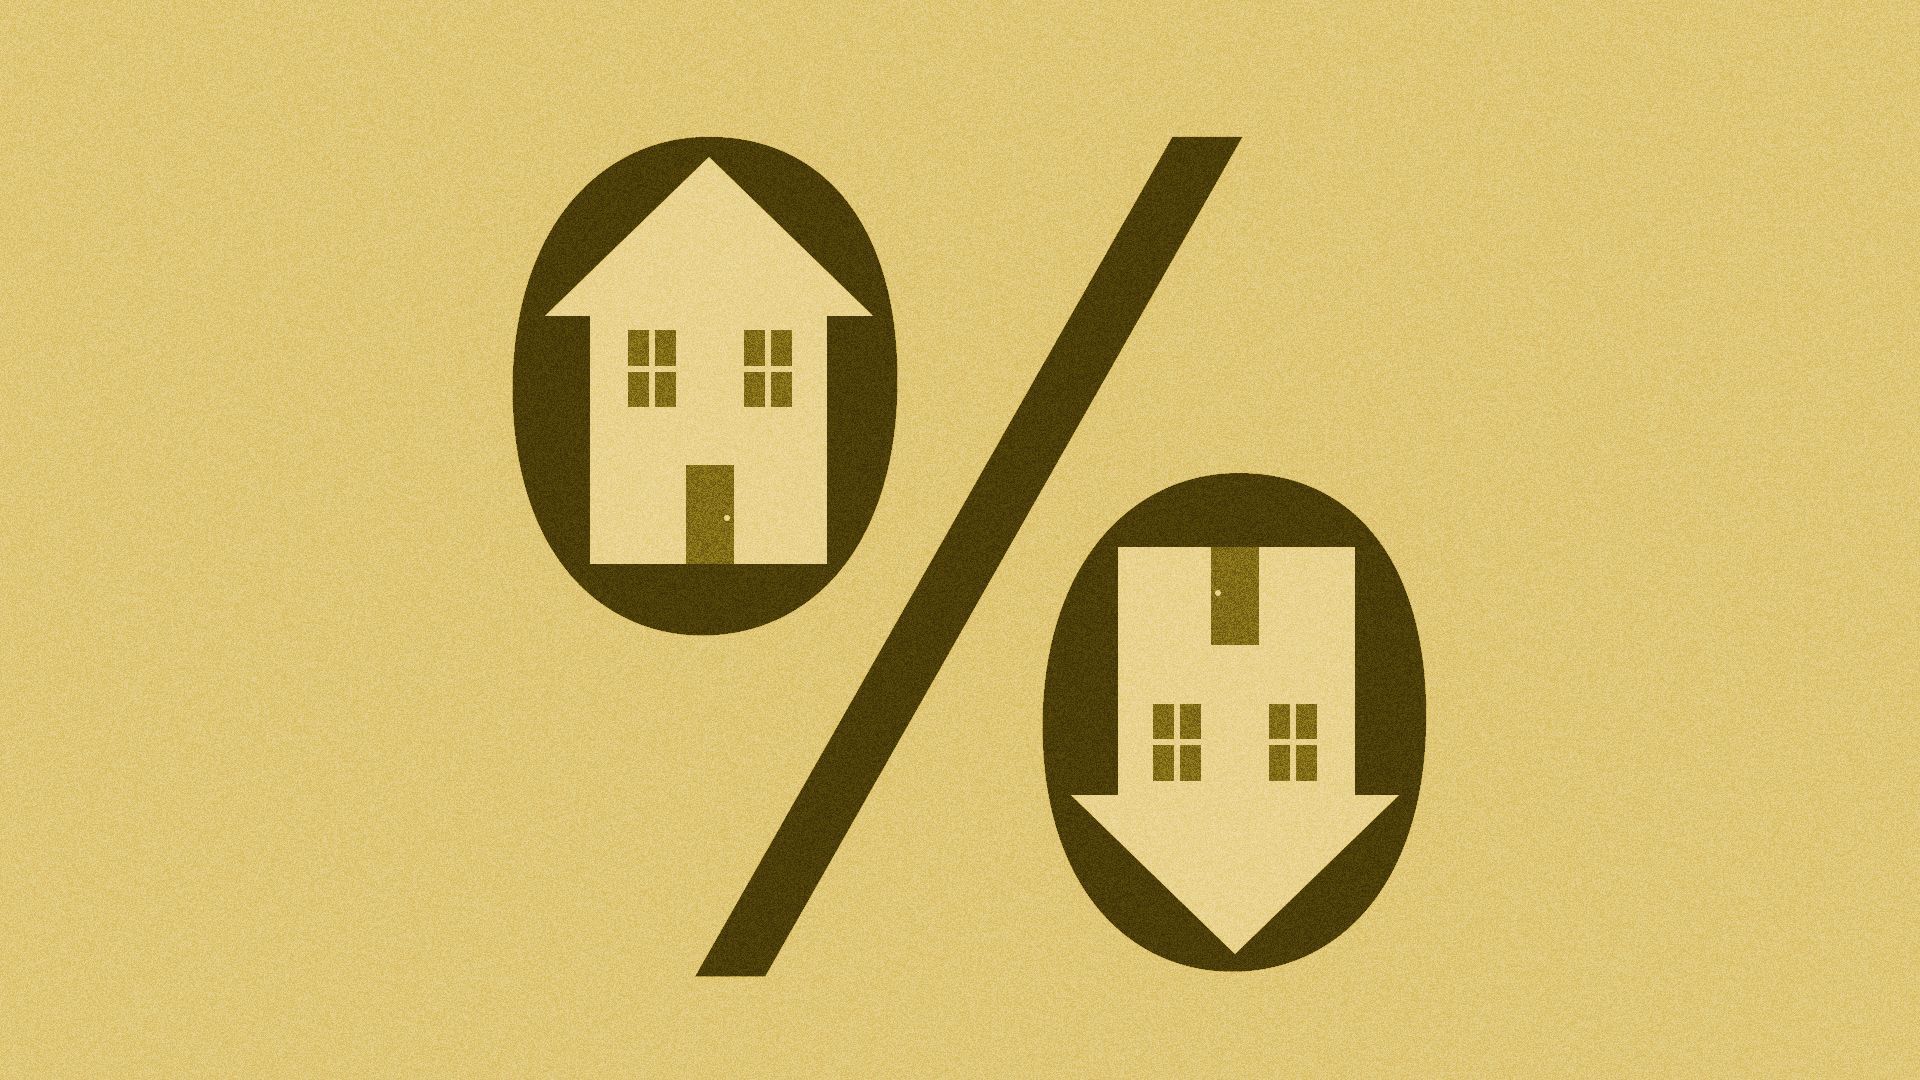 Illustration of a percent sign with a house and upside-down house within the zeroes, forming upward and downward pointing arrows.